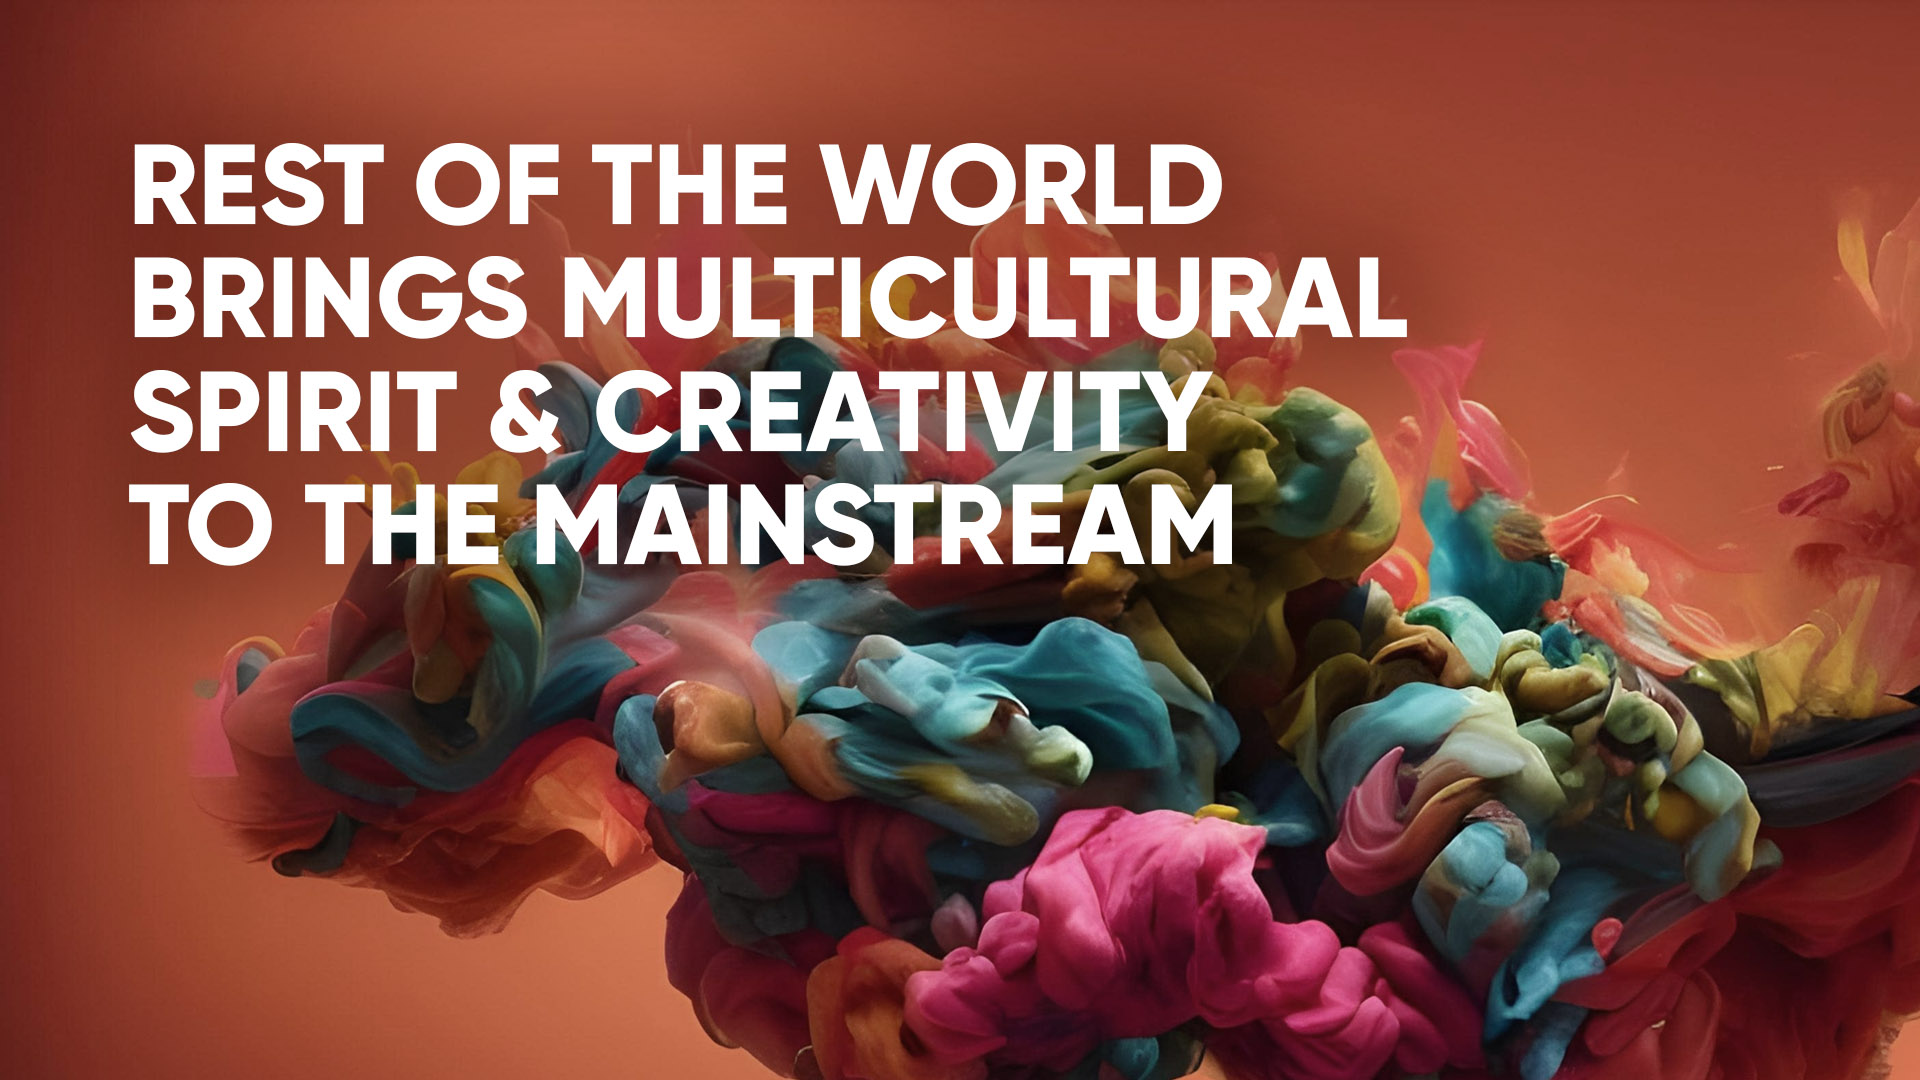 Rest of the World brings multicultural spirit & creativity to the mainstream